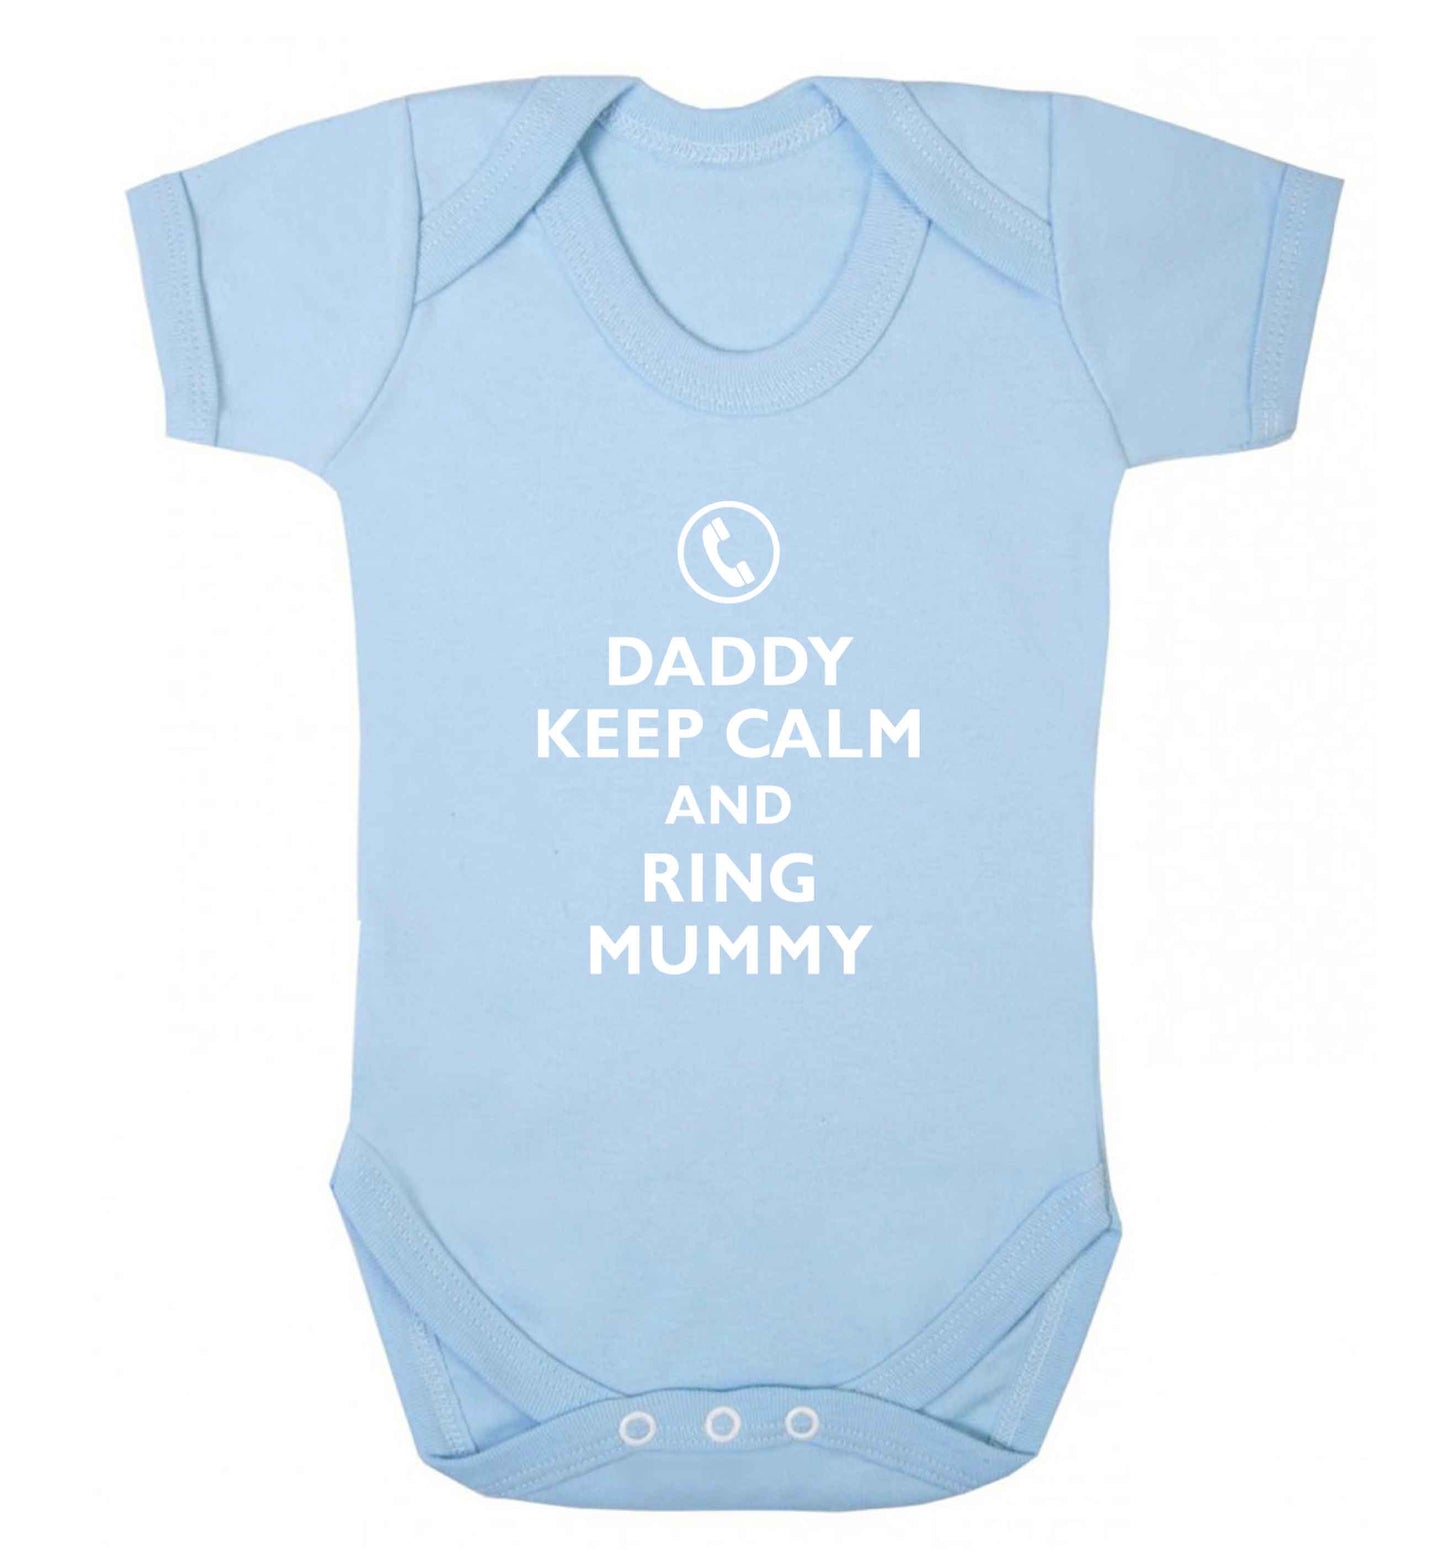 Daddy keep calm and ring mummy baby vest pale blue 18-24 months